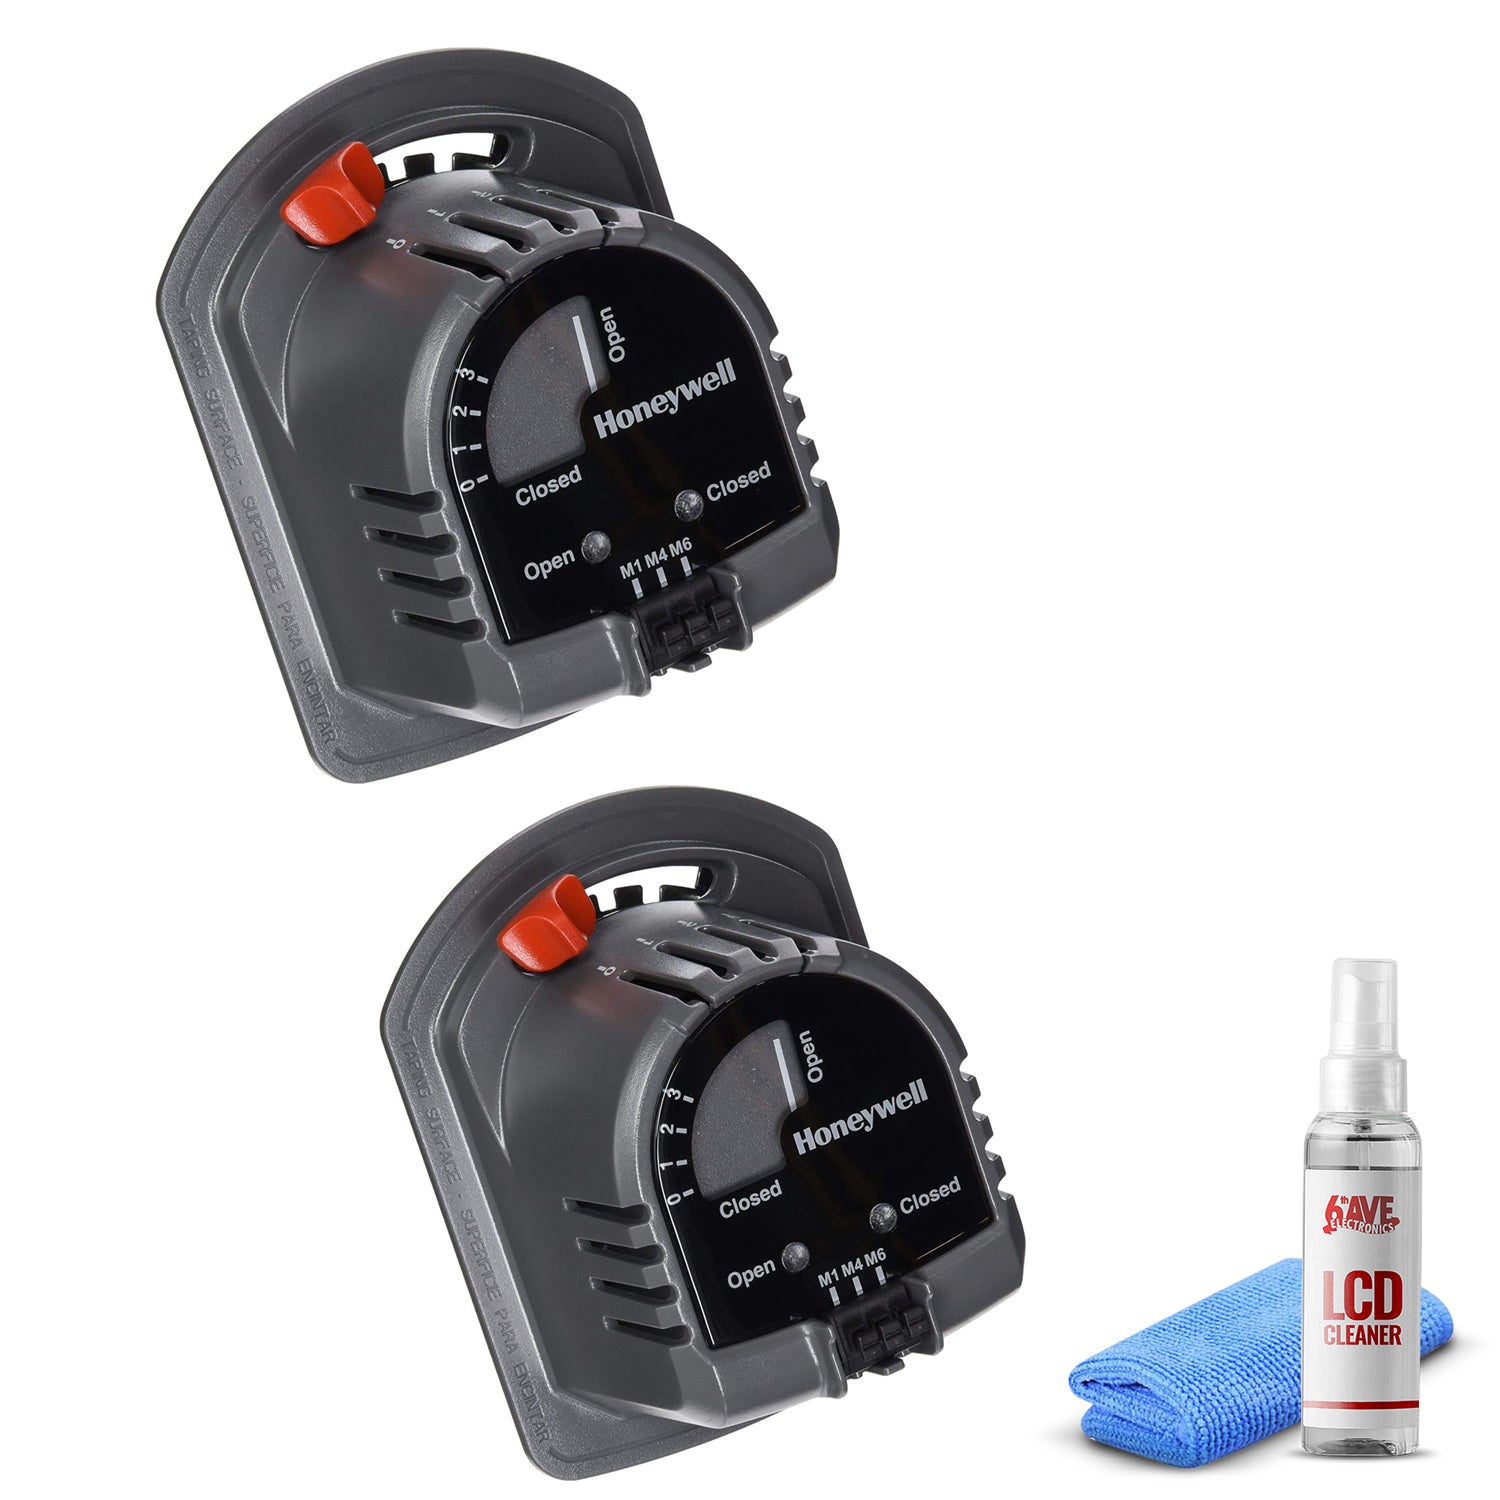 2-Pack Honeywell Replacement Motor for Ard and Zd Zone Dampers 24V + LCD Cleaner